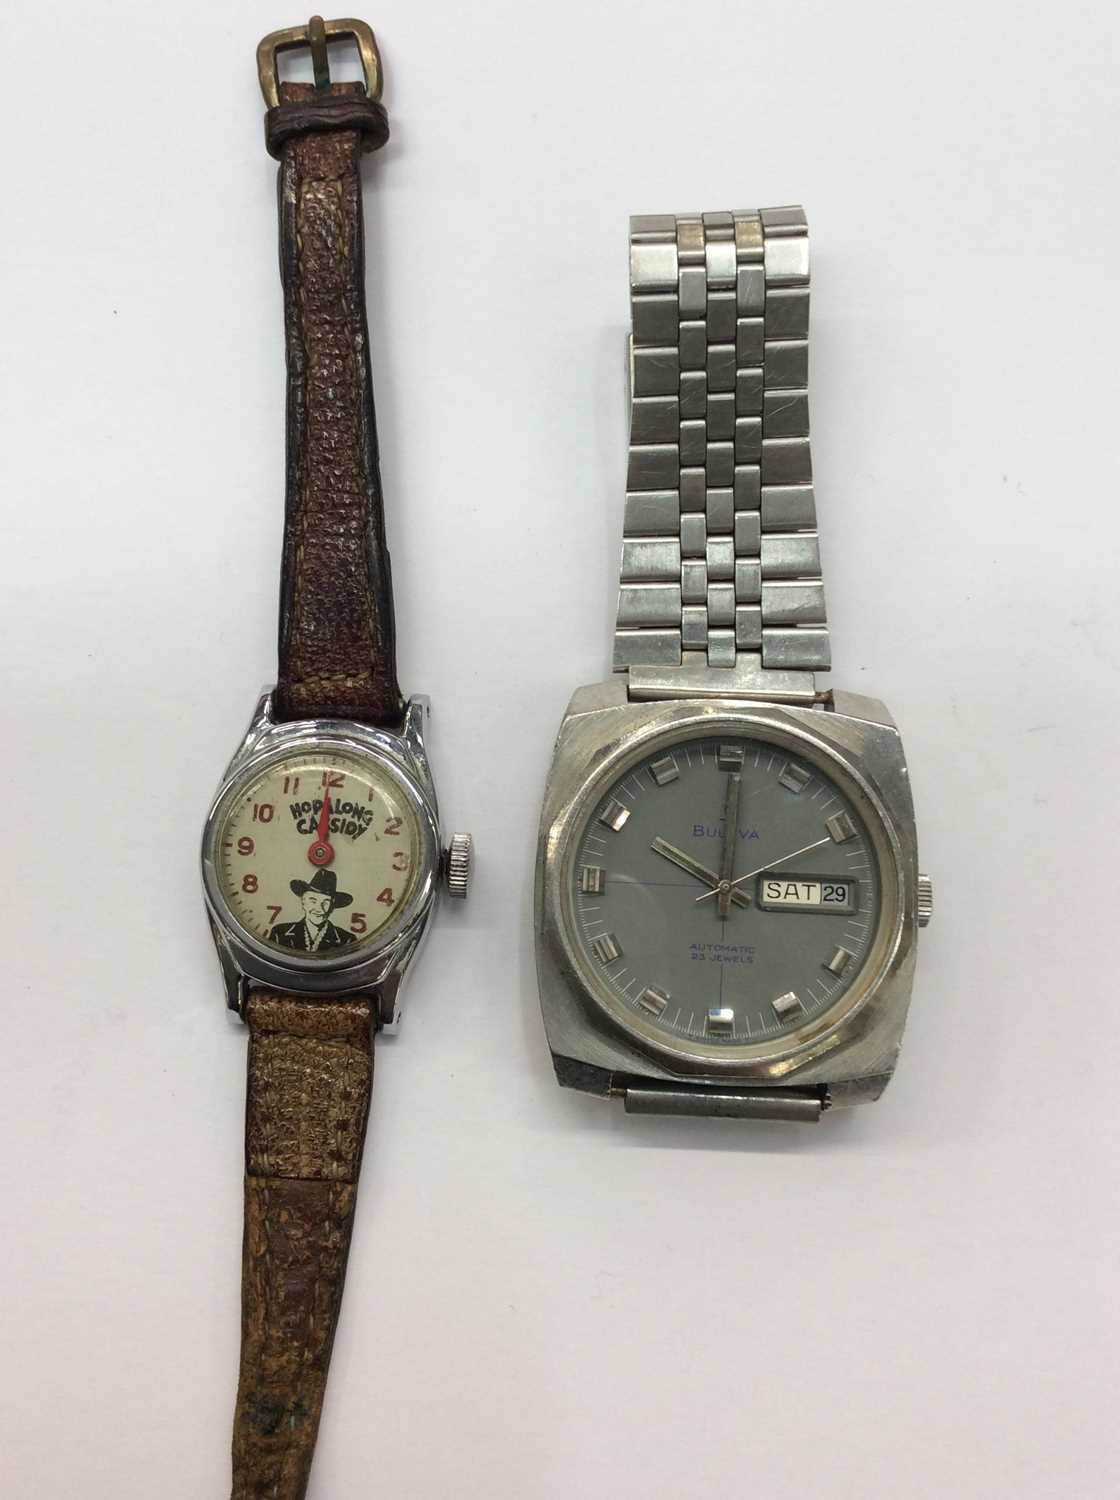 Bulova stainless steel wristwatch with grey dial and date aperture, together with a vintage Hopalong